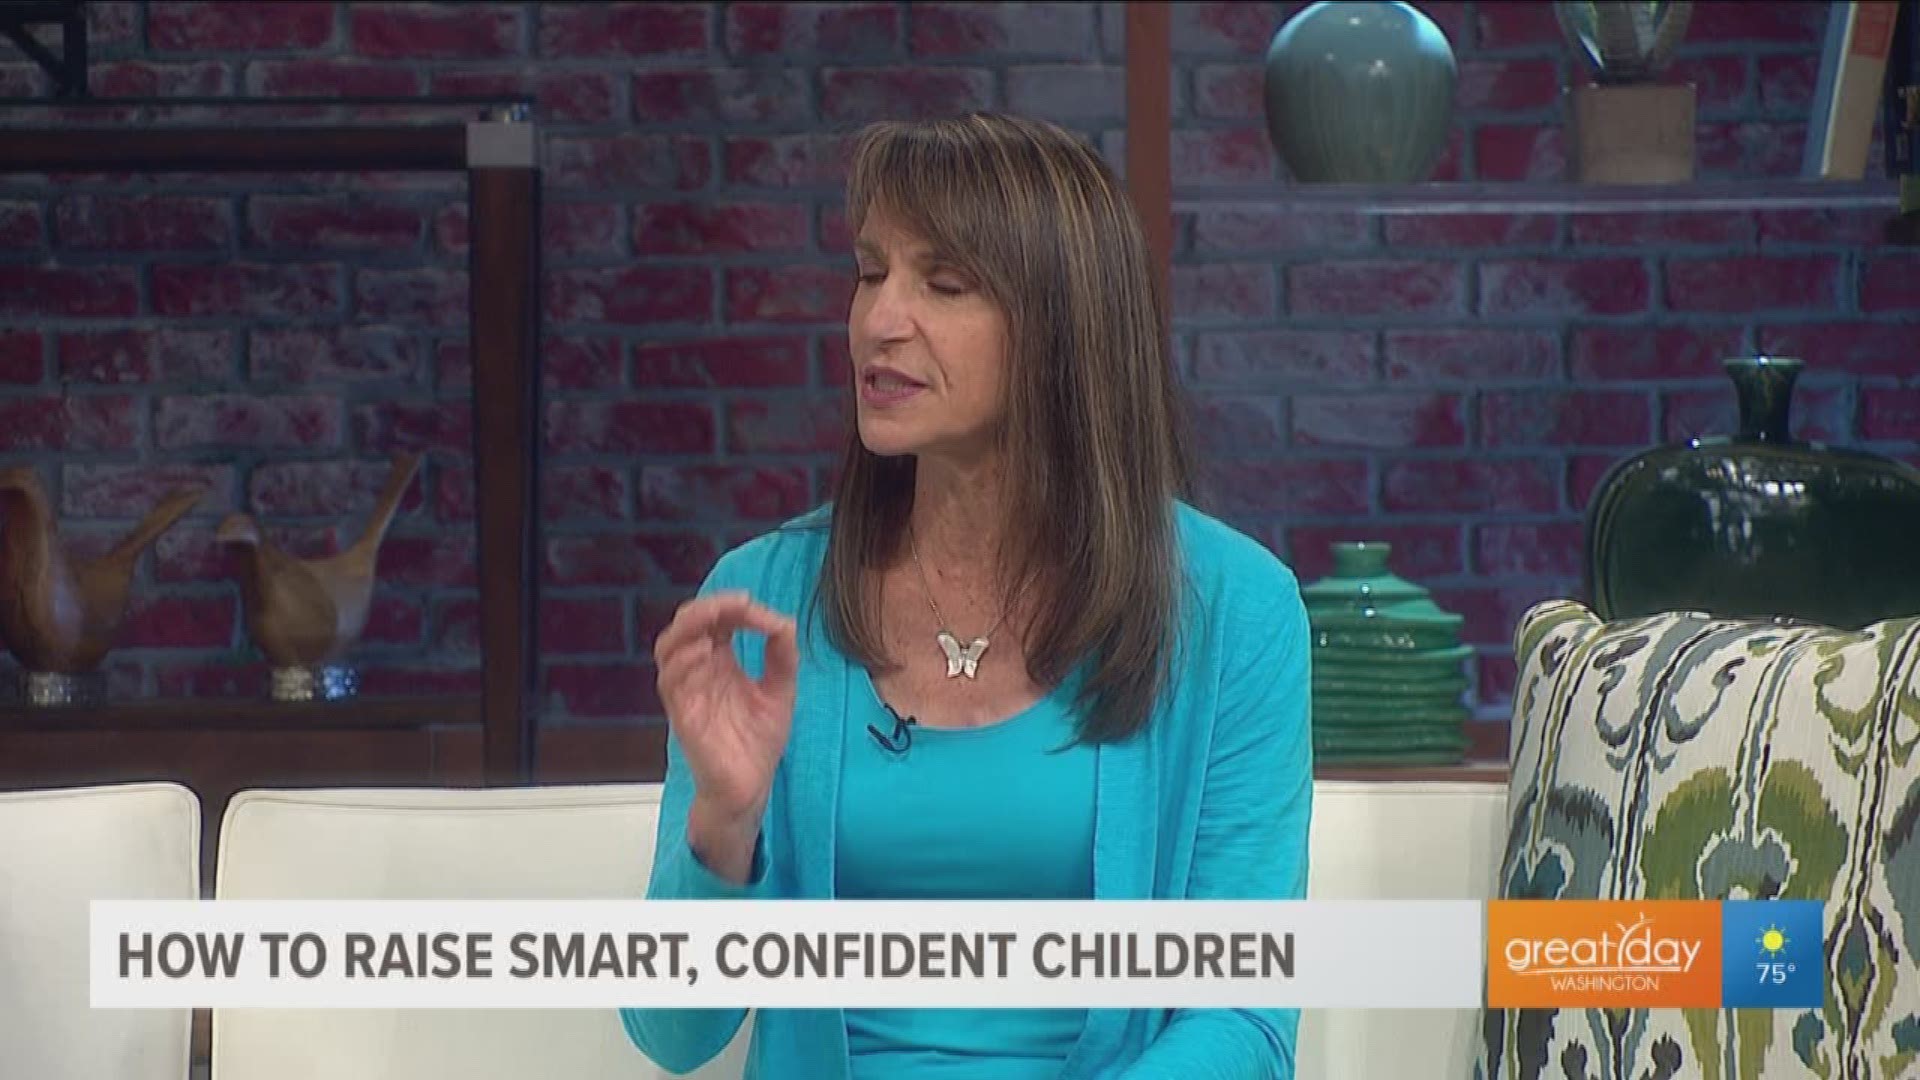 Patricia Wilkinson, Author of "BRAIN STAGES: How To Raise Smart, Confident Kids and Have Fun Doing It" shares ways to instill self-esteem and raise accountable children.